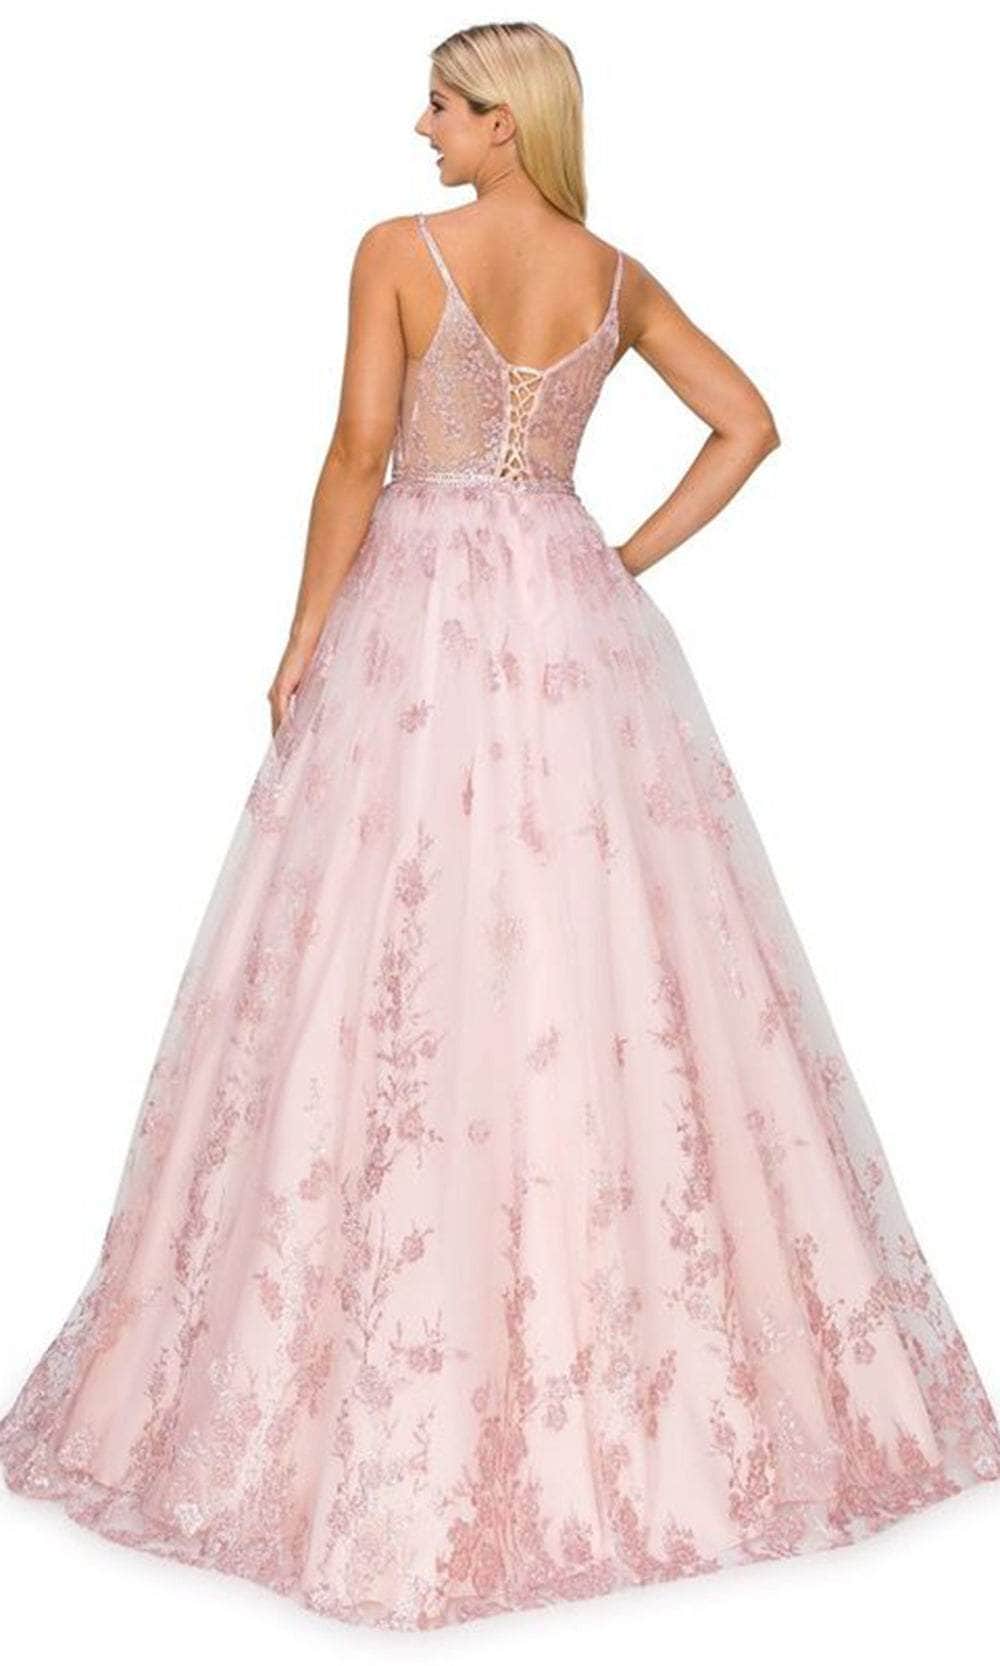 Cinderella Couture 8039J - Plunging Neck A-line Dress Special Occasion Dress